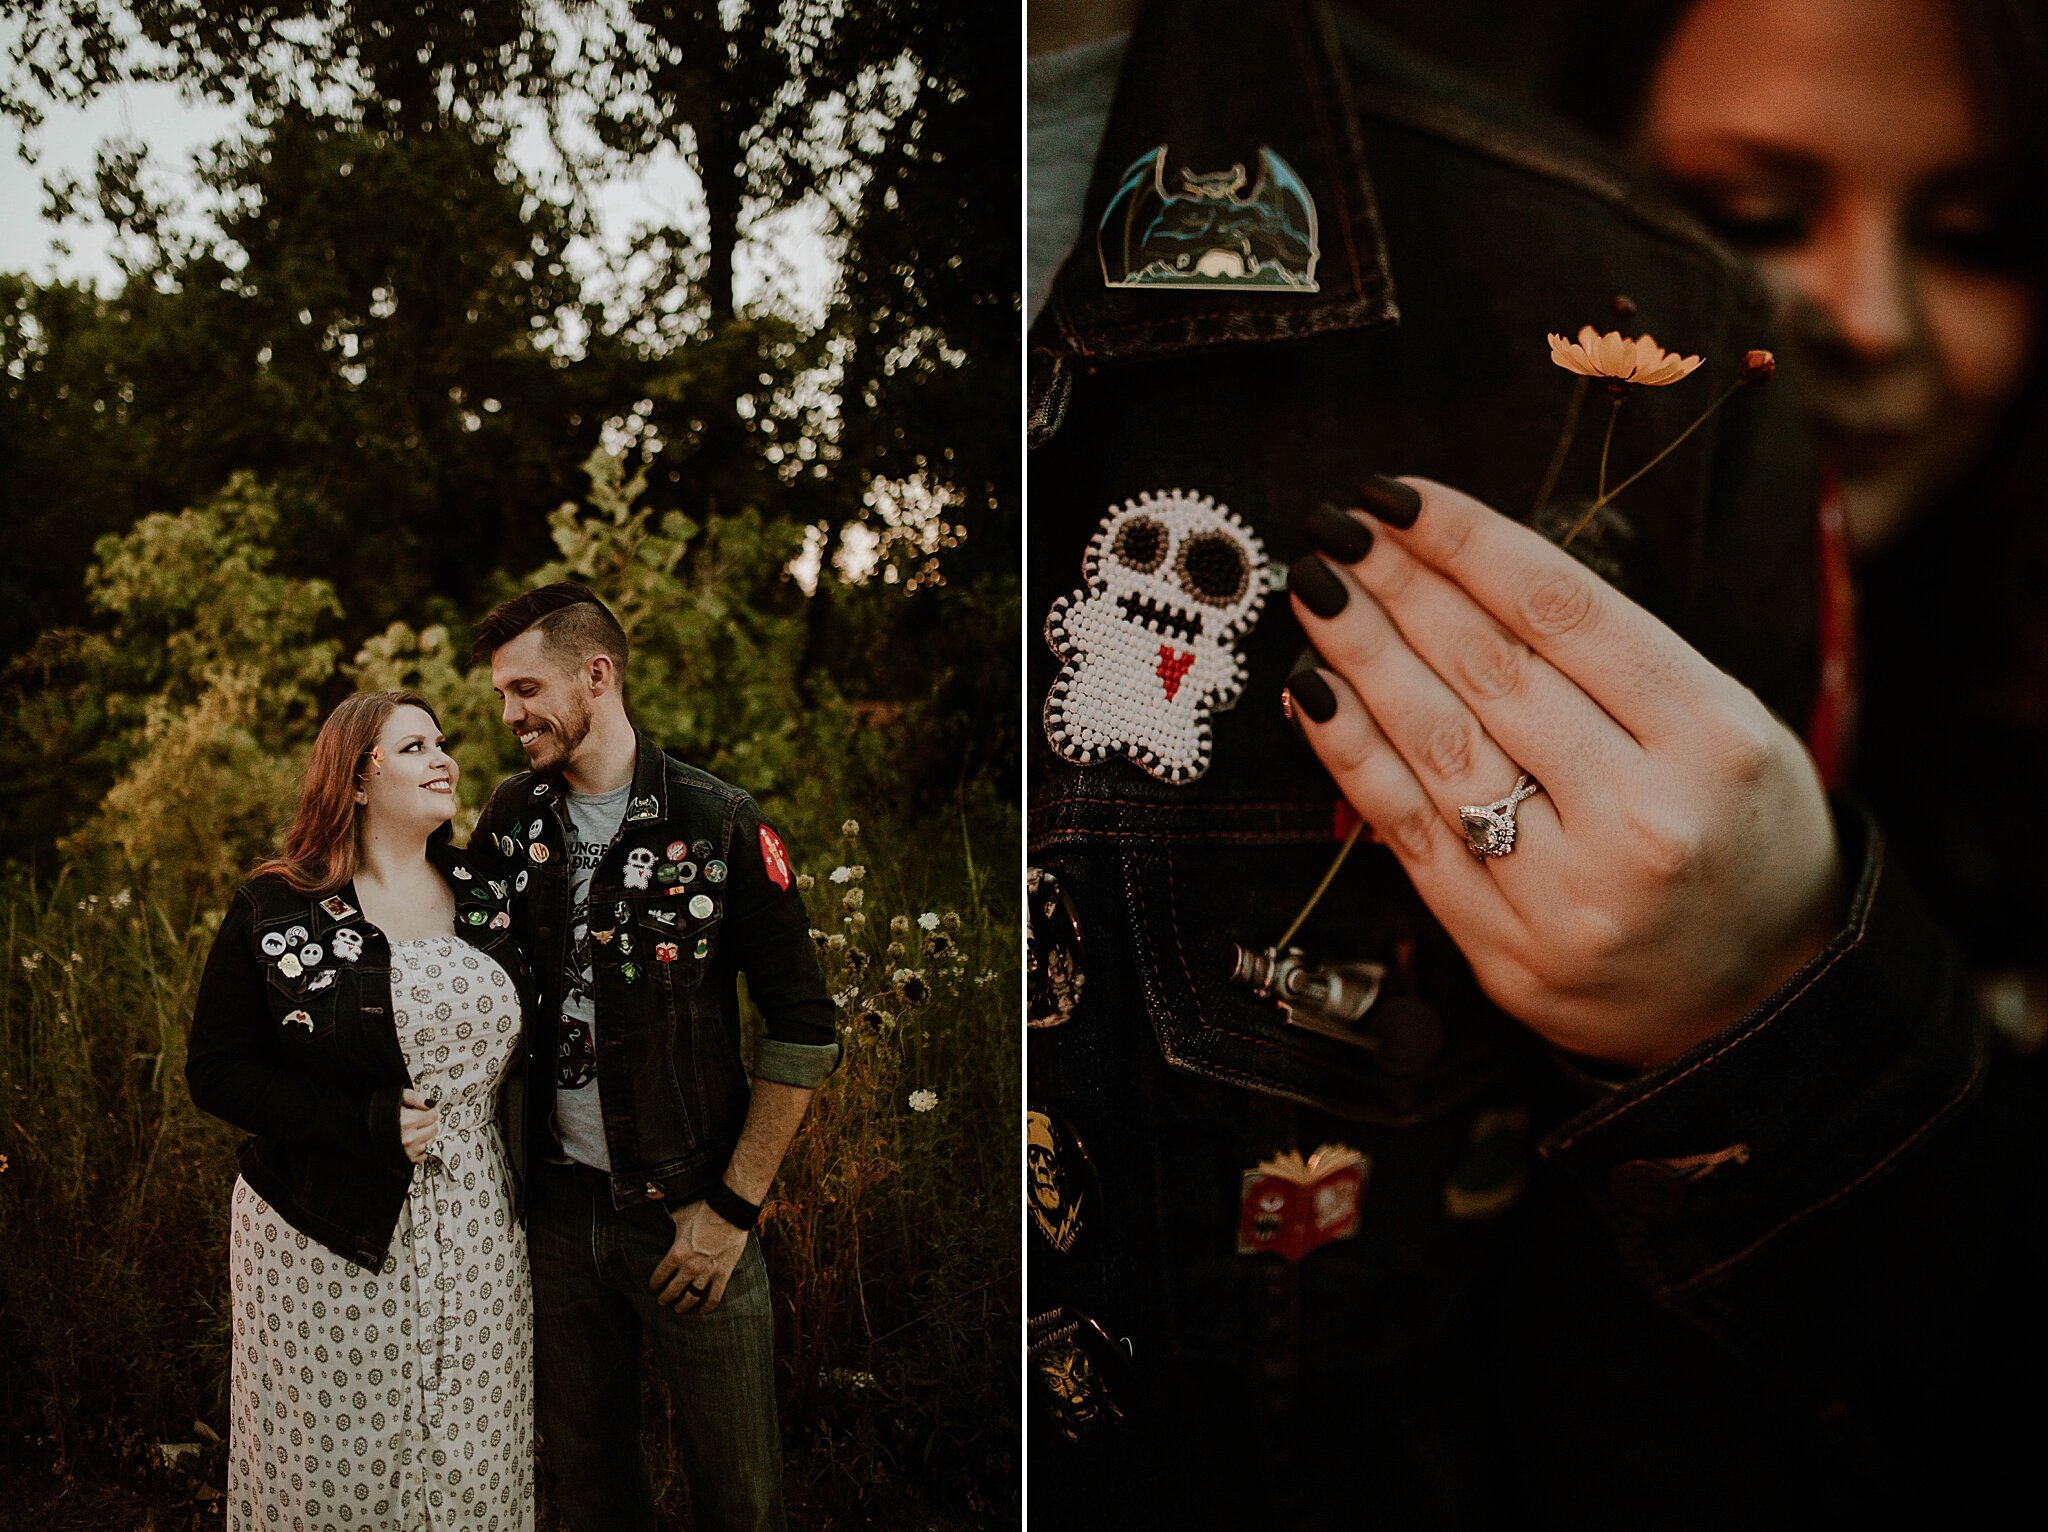 edgy couple poses in leather jackets during spooky graveyard engagement session